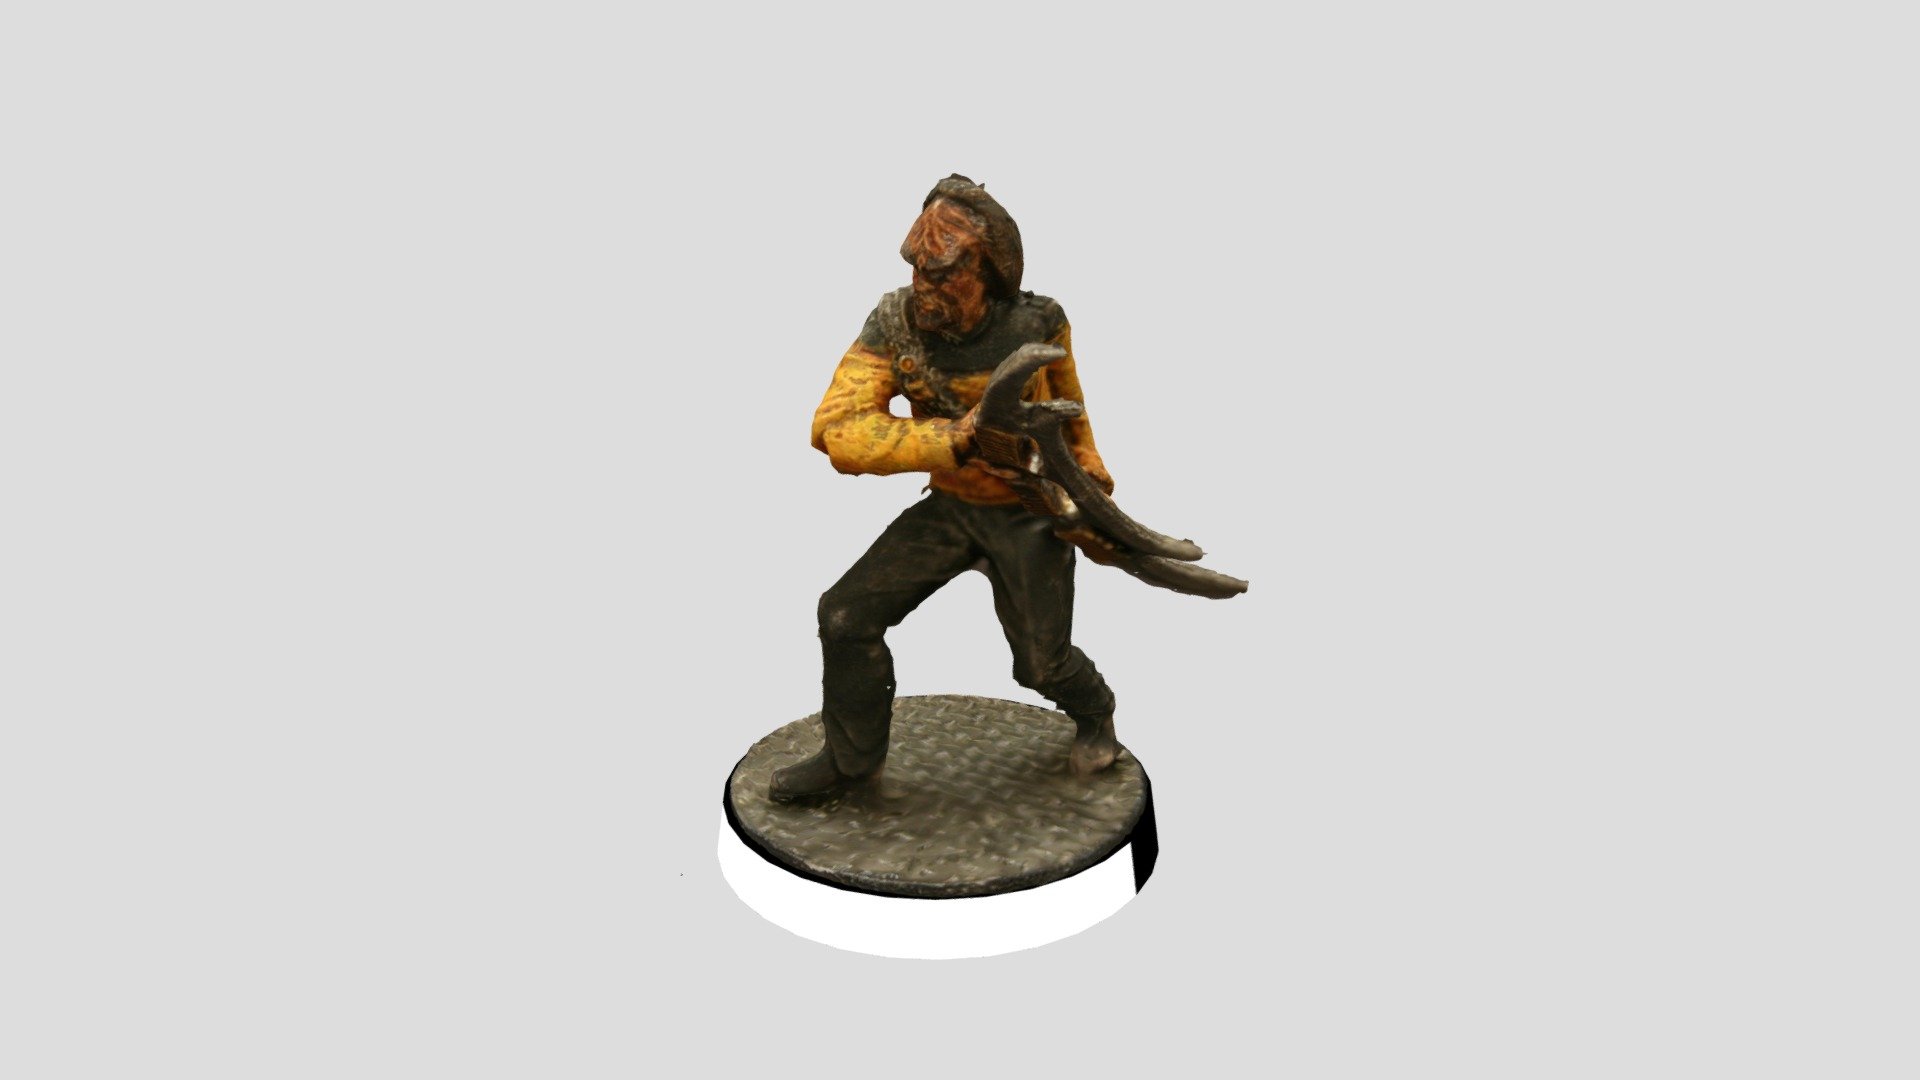 Based on Modiphius' STAR TREK Adventures: The Next Generation

If you would like to 3D Print this model you can purchase the files here:
https://www.modiphius.net/products/star-trek-adventures-print-at-home-tng-bridge-crew-set?_pos=63&amp;_sid=5e411b6a9&amp;_ss=r

Photography &amp; photogrammetry by myself, Chad Curran ( https://www.facebook.com/chad.curran.58/ )

Leutenant Worf is the chief of security and the head of tactical on board the Galaxy Class starship the Enterprise D. Here he is weilding a klingon Batleth. Worf also served on Deep Space Nine 3d model